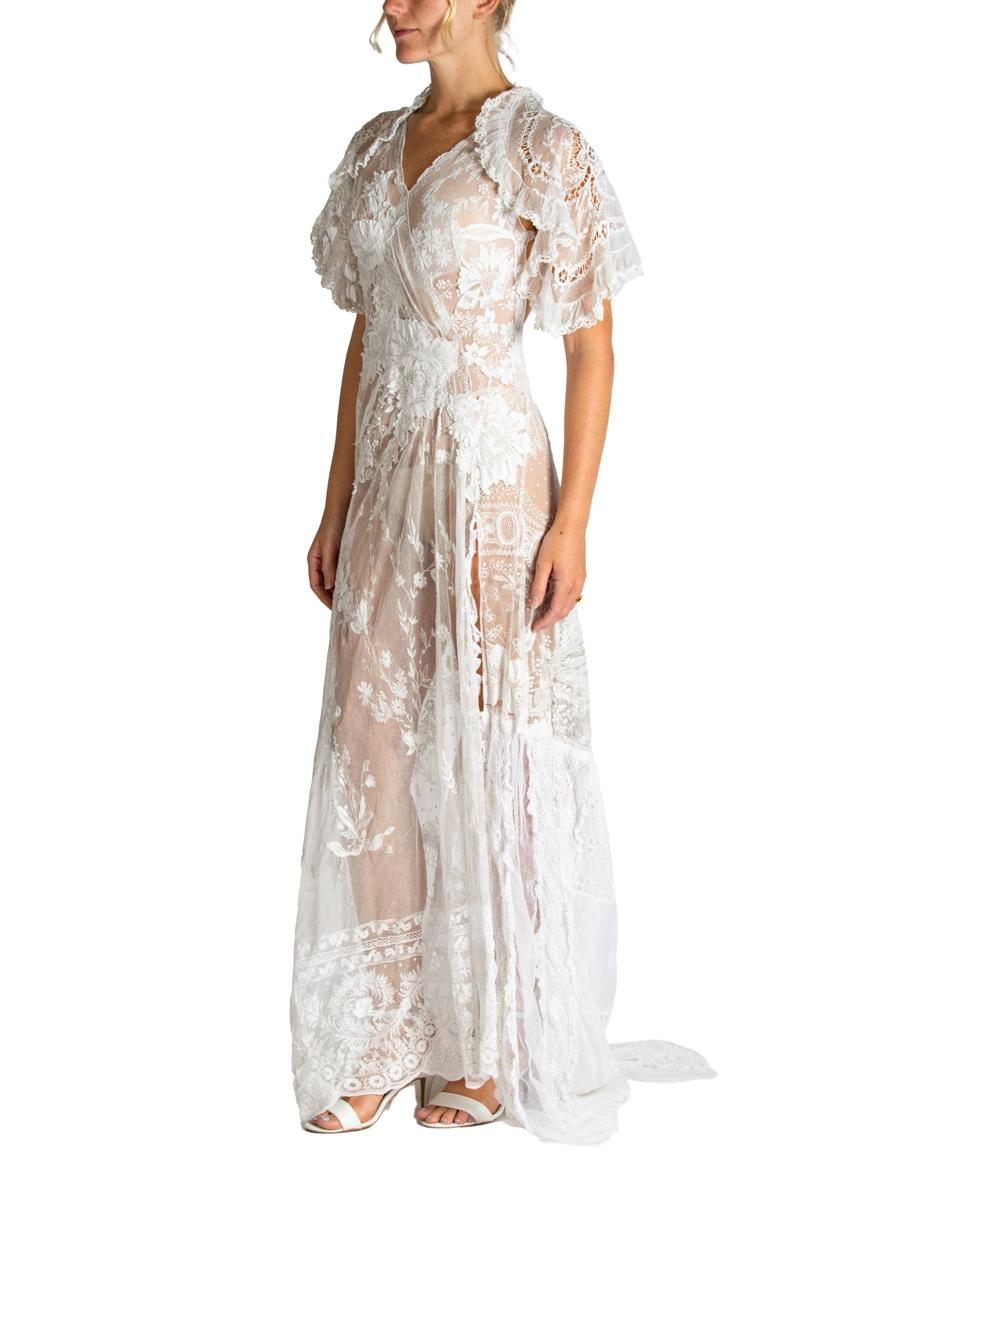 MORPHEW ATELIER White Cotton Embroidered Antique Net Lace Gown With Cut-Out Back For Sale 2